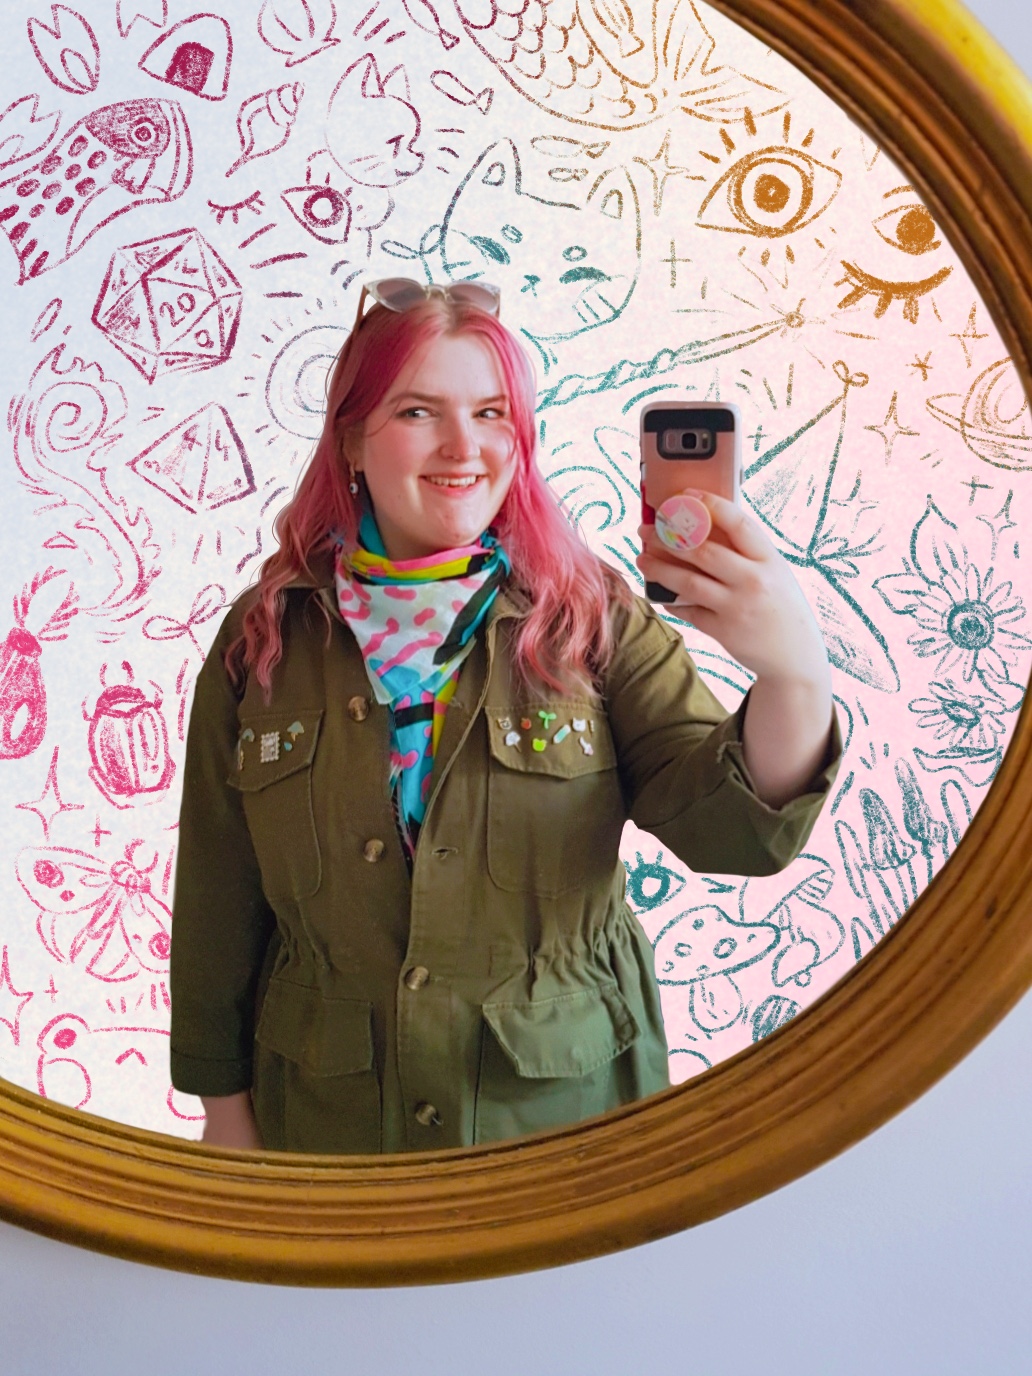 A mirror selfie of the artist. She is smiling, wearing a olive green jacket with pins on the chest pockets. She has pink hair. In the background are sketchy drawings of items such as, cats, dice, flowers, mushrooms and more.